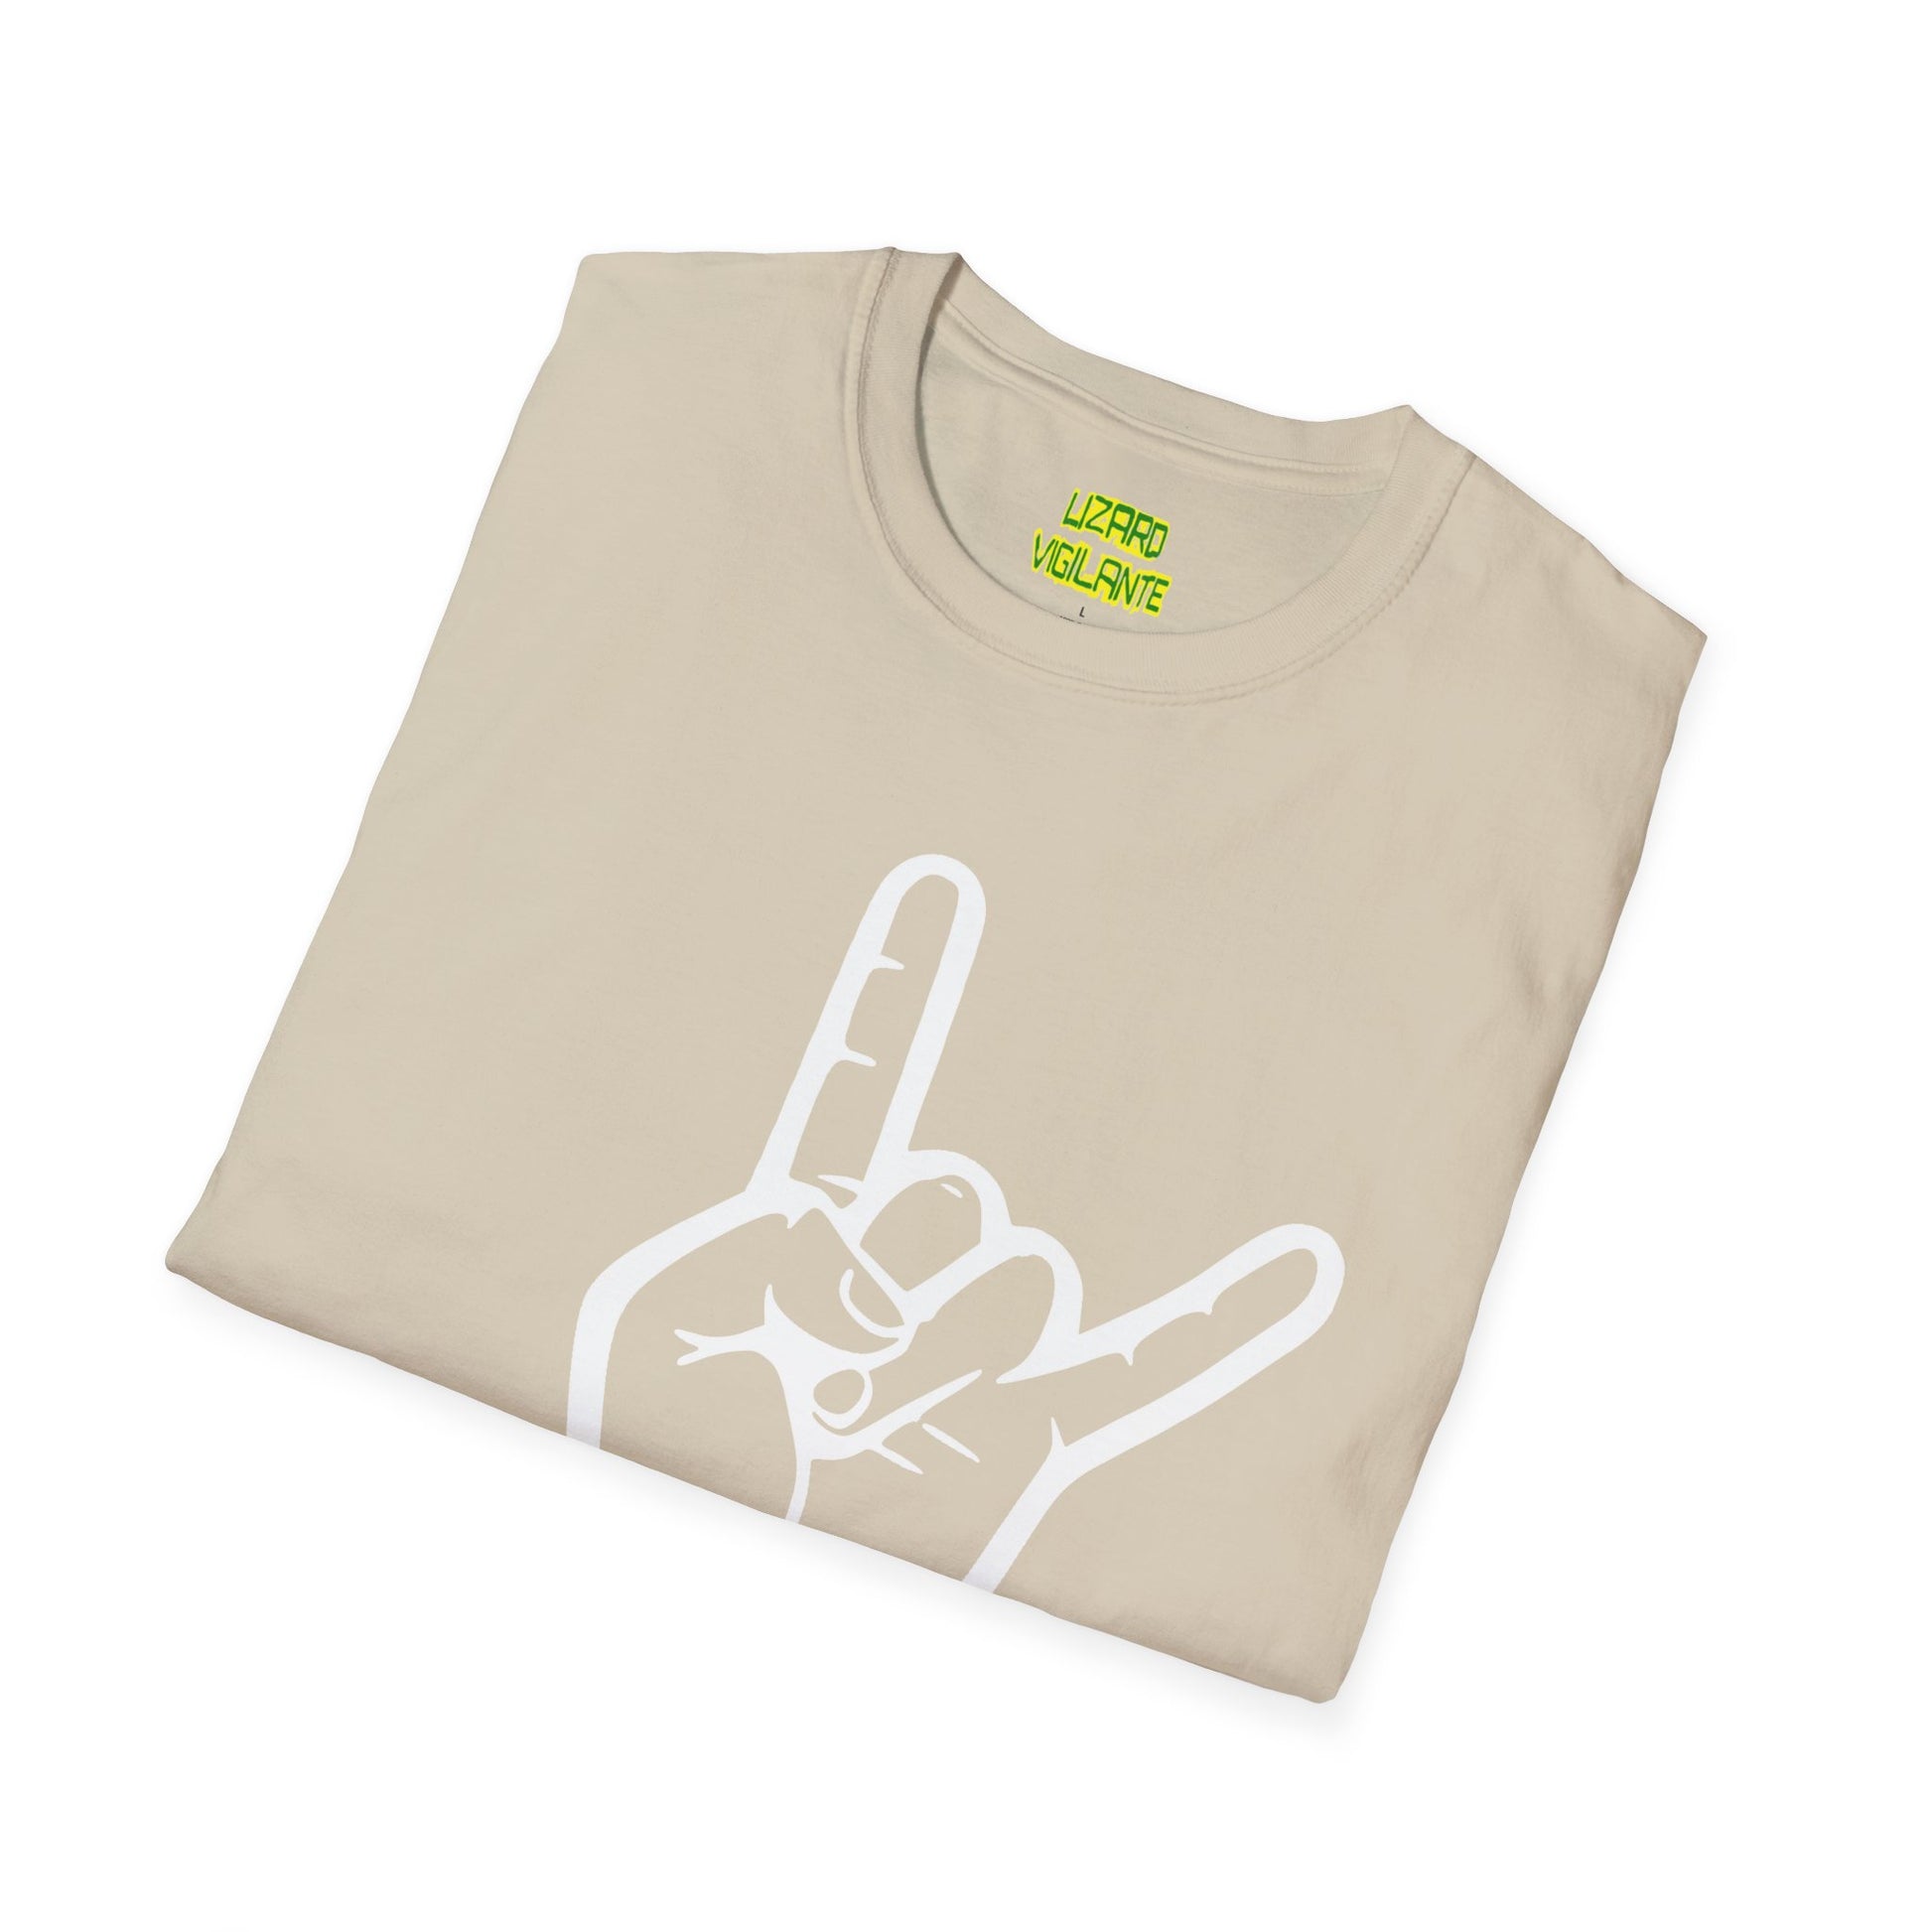 Metal Hand Gesture With Spiked Wristband Unisex Softstyle T-Shirt, White - Lizard Vigilante